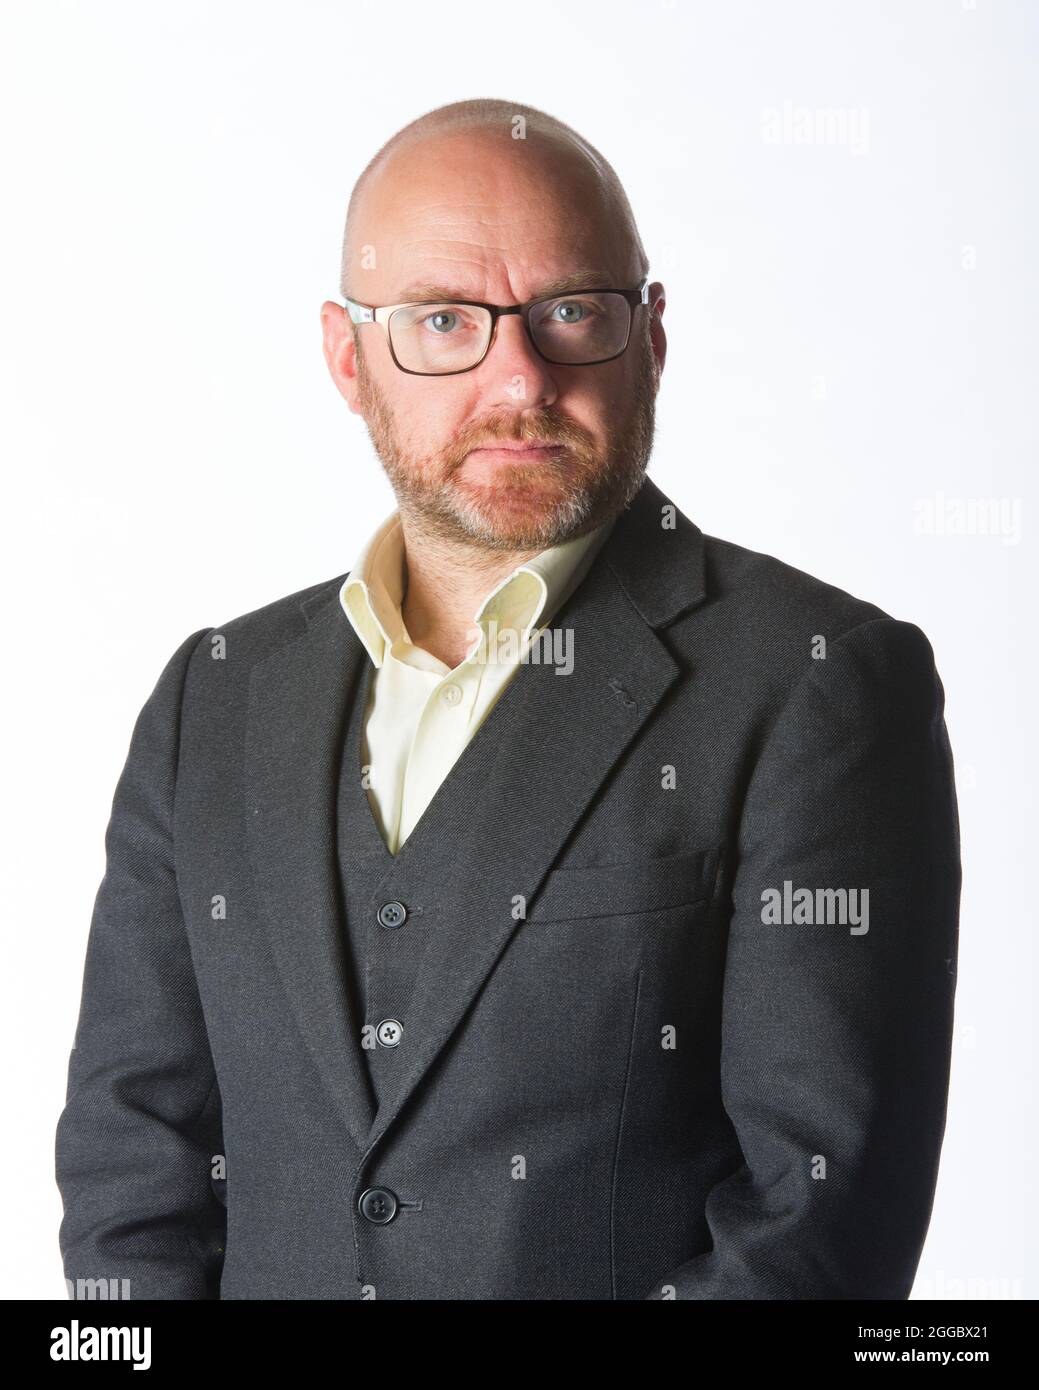 **Stock Image** Edinburgh, UK. 30th Aug, 2021. Pictured: Patrick Harvie MSP will be Minister for Zero Carbon Buildings, Active Travel and Tenant's Rights under the new coalition deal with the Scottish National Party (SNP). Inverness, UK. 12 October 2019. Pictured: Patrick Harvie MSP- Co-Leader of the Scottish Green Party. Studio based Photoshoot. Scottish Green Party National Conference, Eden Court Theatre. Credit: Colin D Fisher/CDFIMAGES.COM Credit: Colin Fisher/Alamy Live News Stock Photo